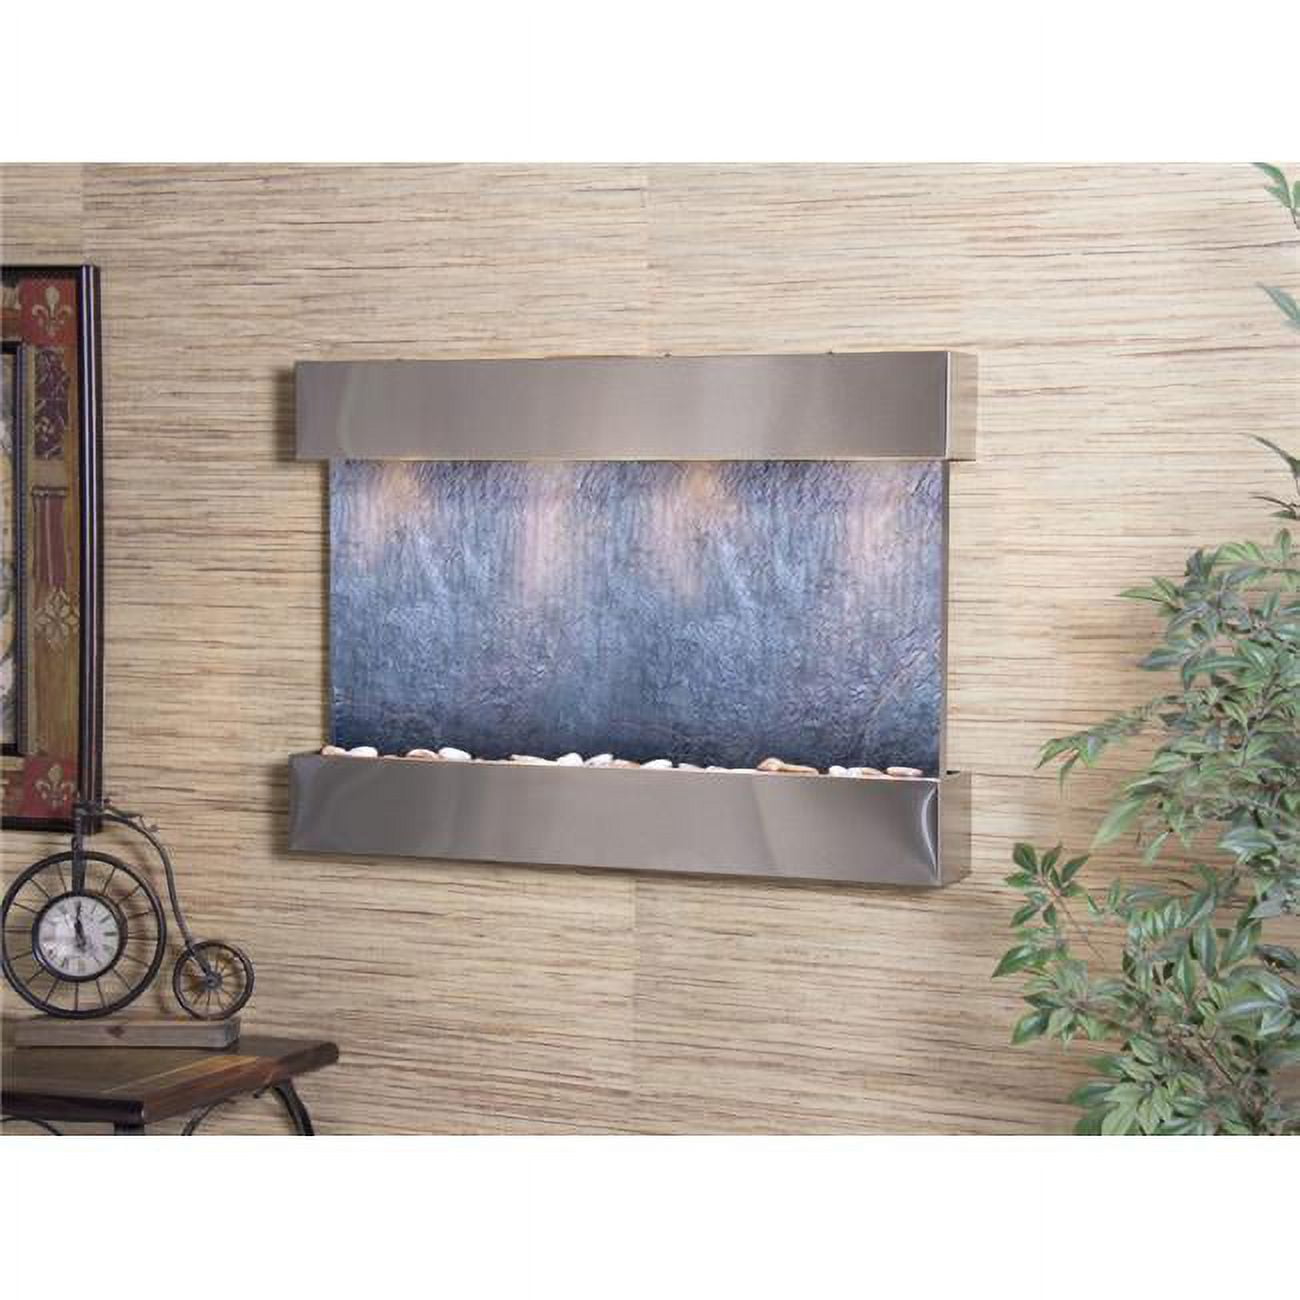 Adagio RCS2011 Reflection Creek Stainless Steel Black Featherstone Wall Fountain